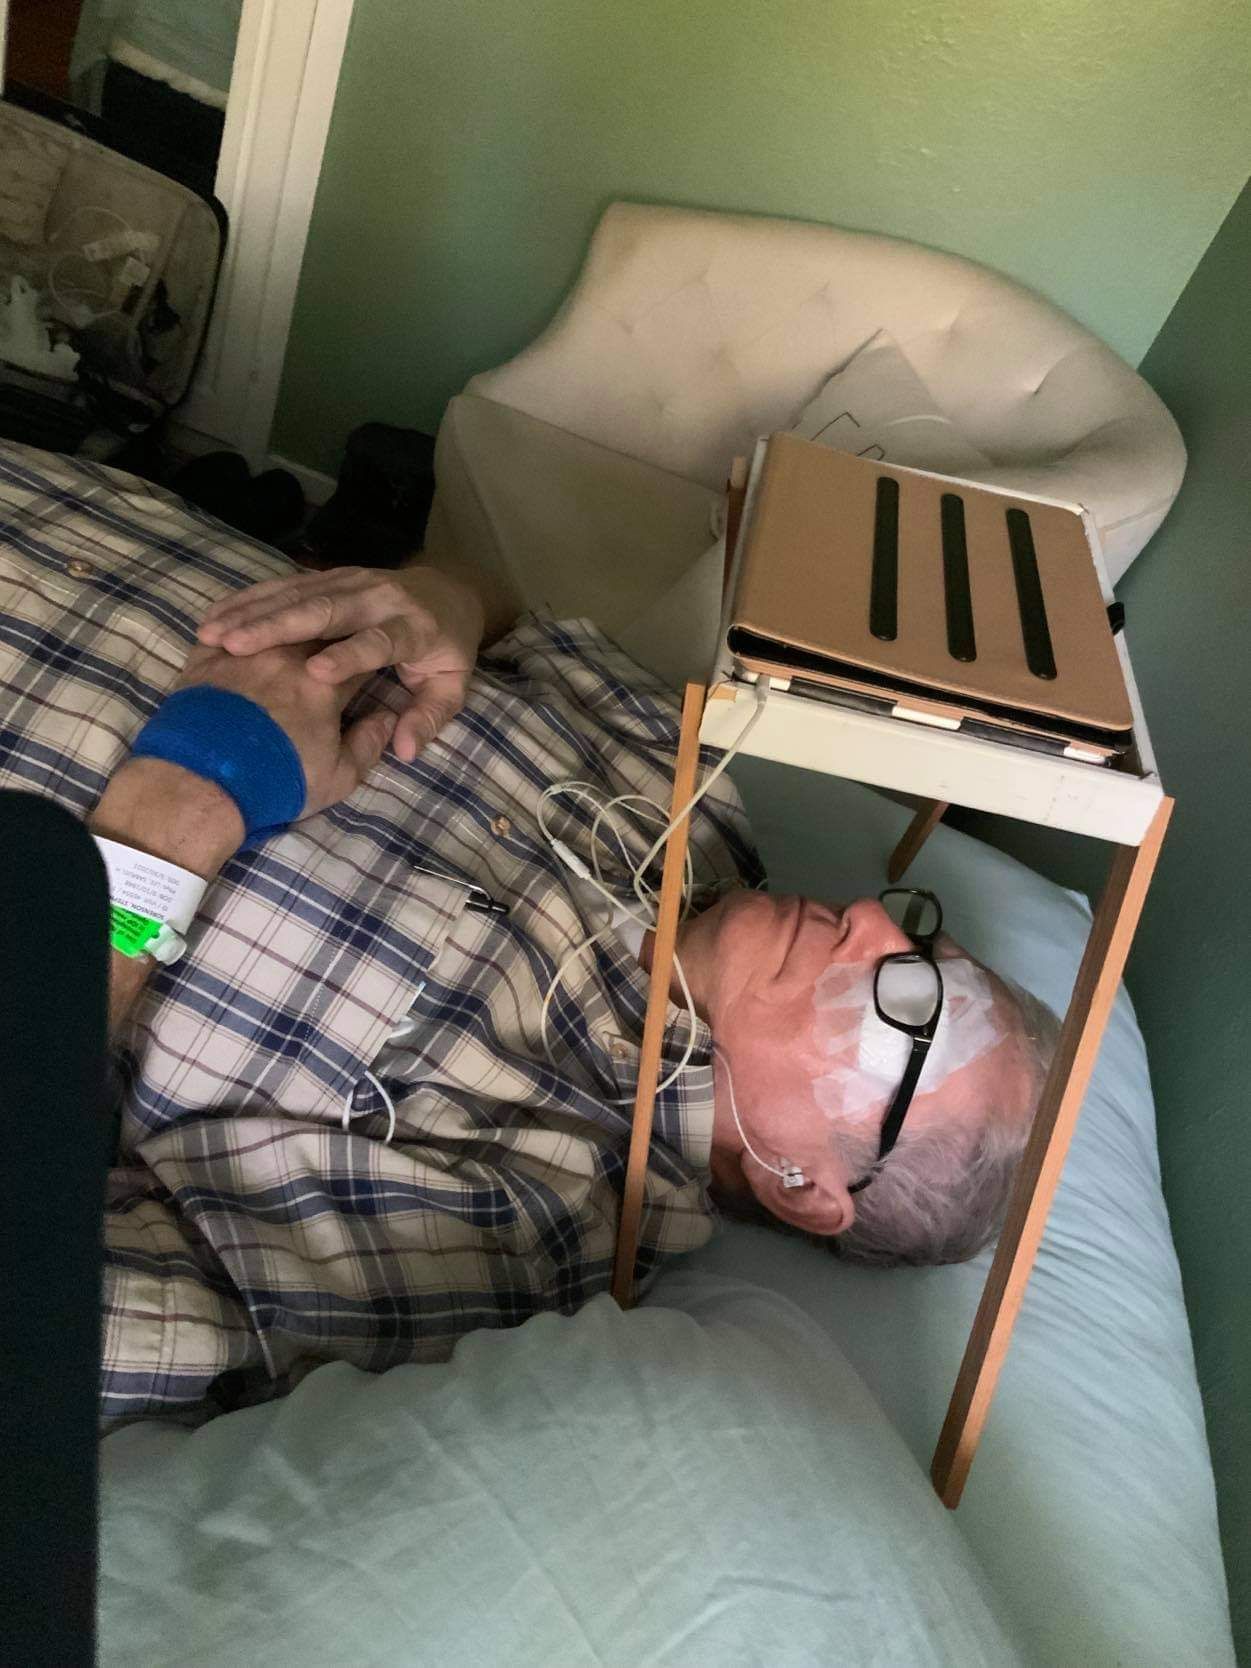 My dad's "homemade iPad holder" for after his eye surgery